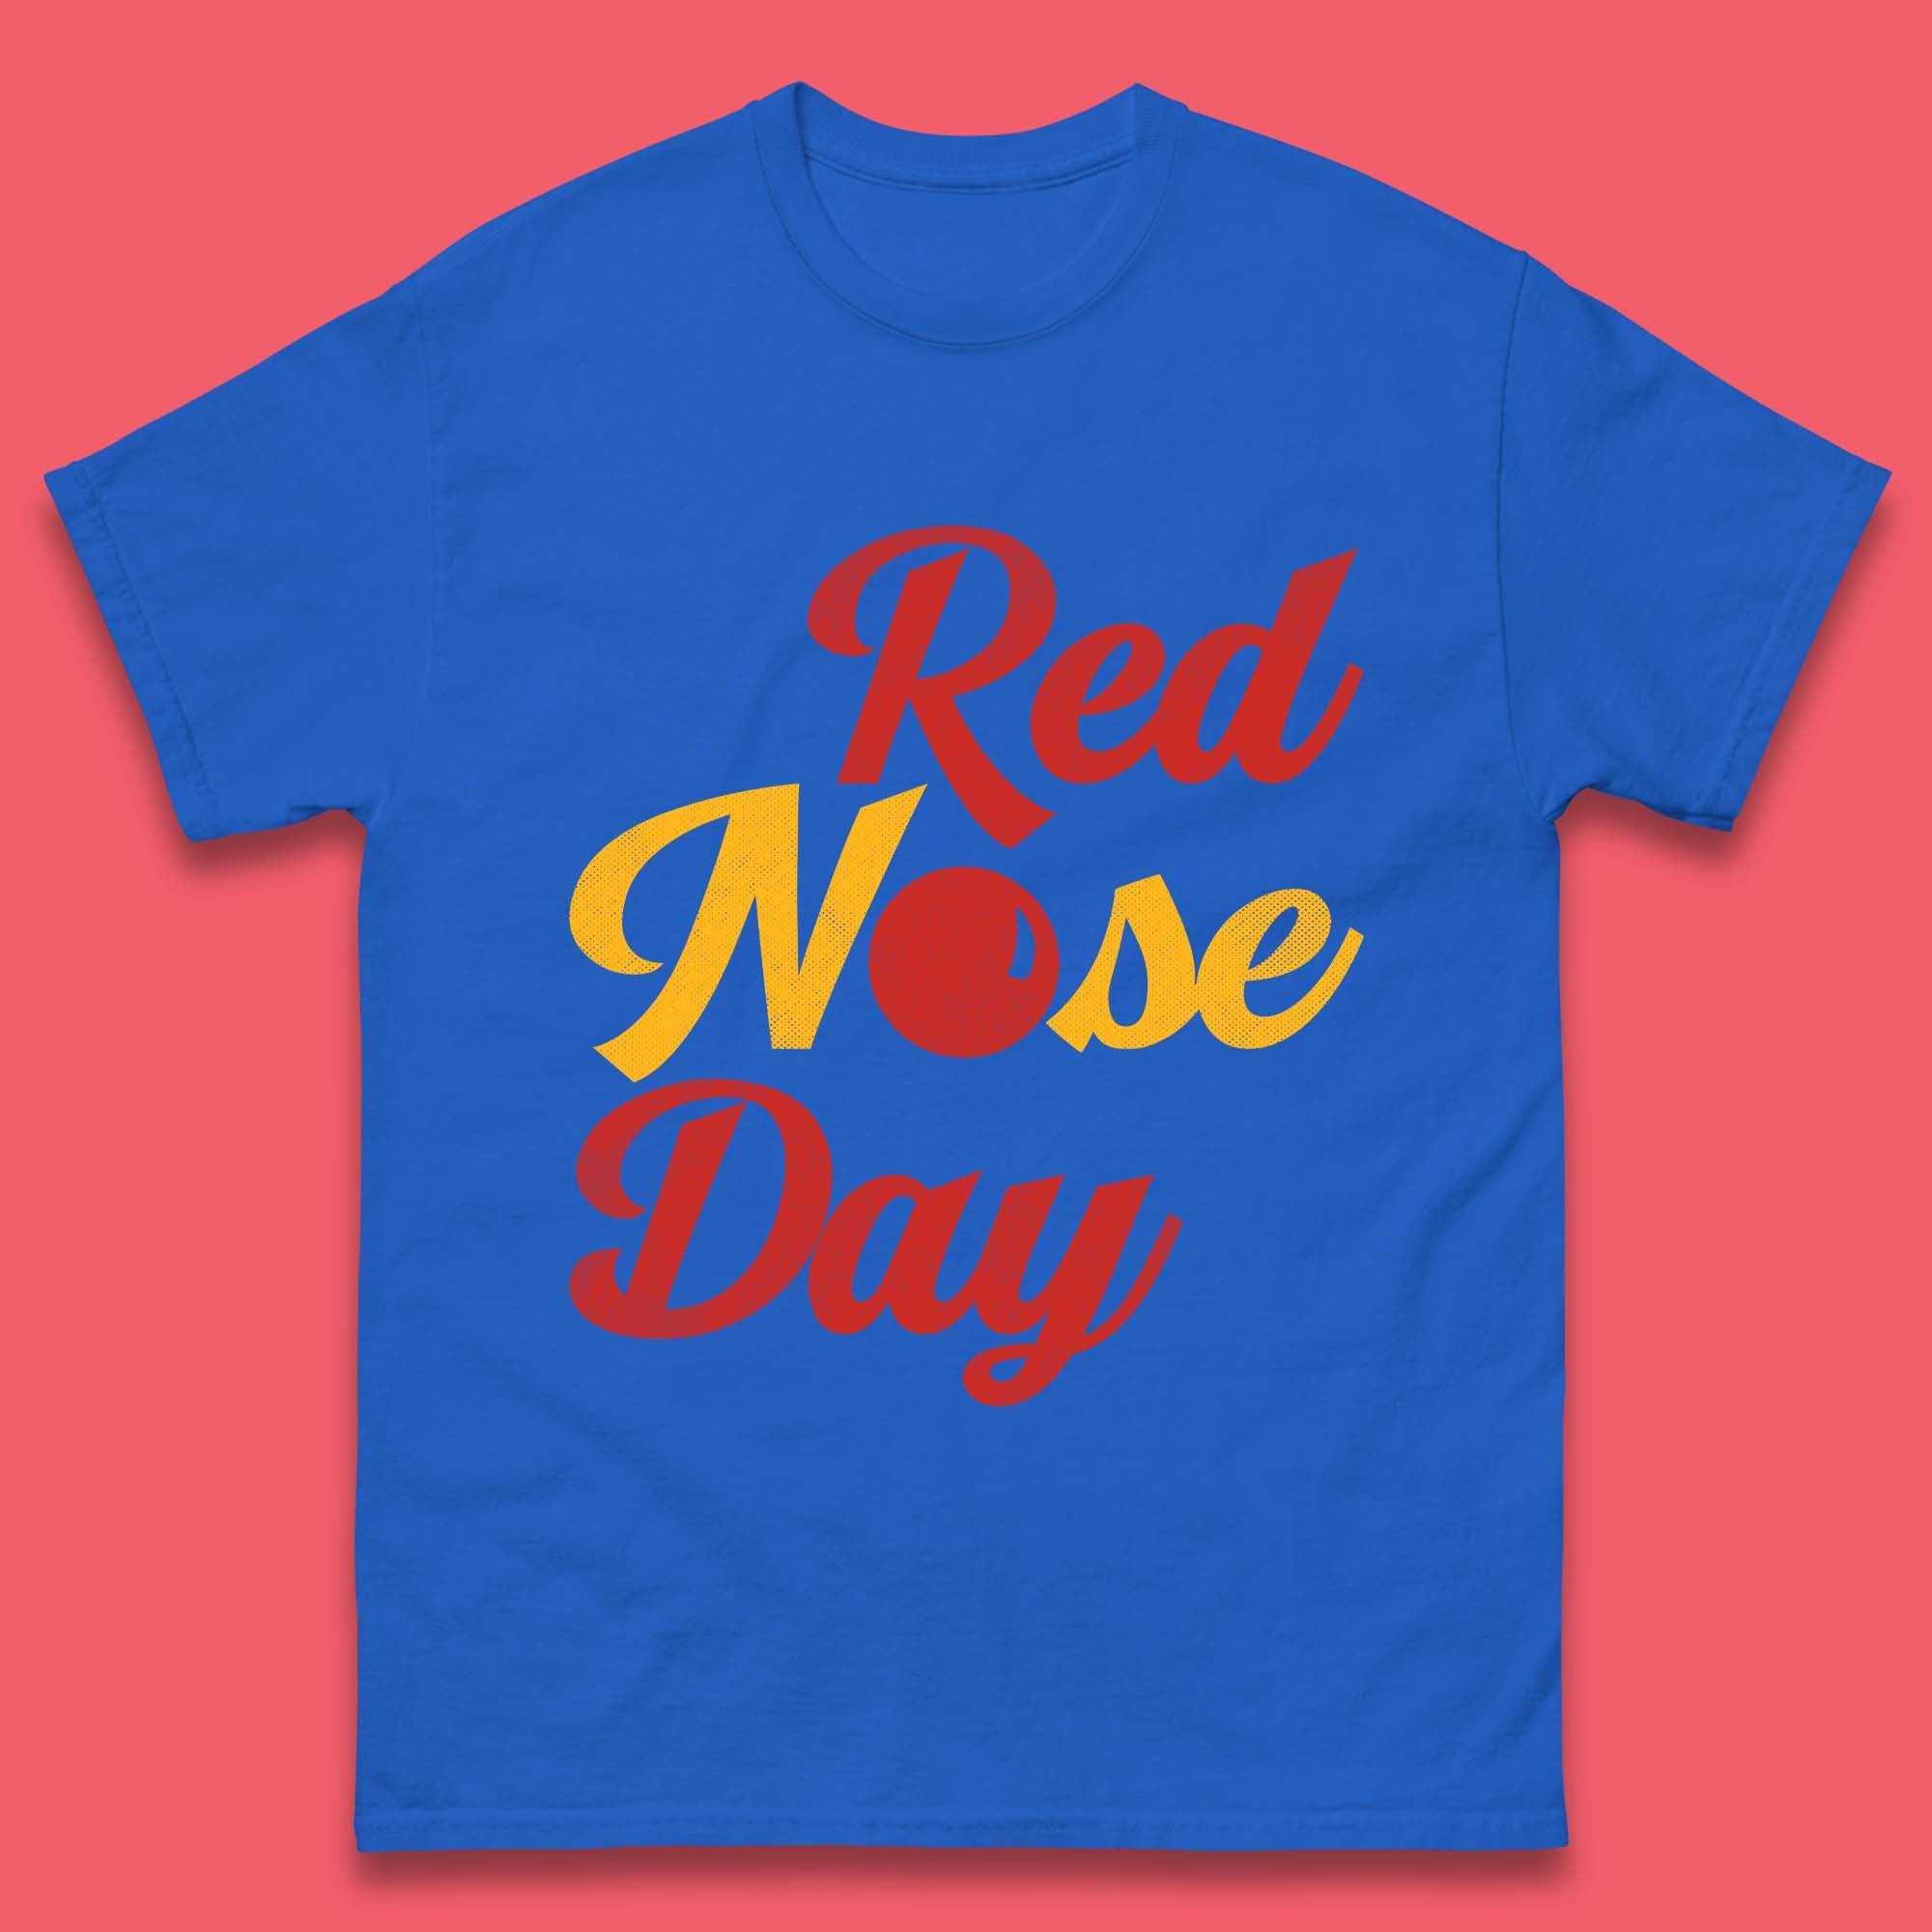 Red Nose Day Mens T-Shirt